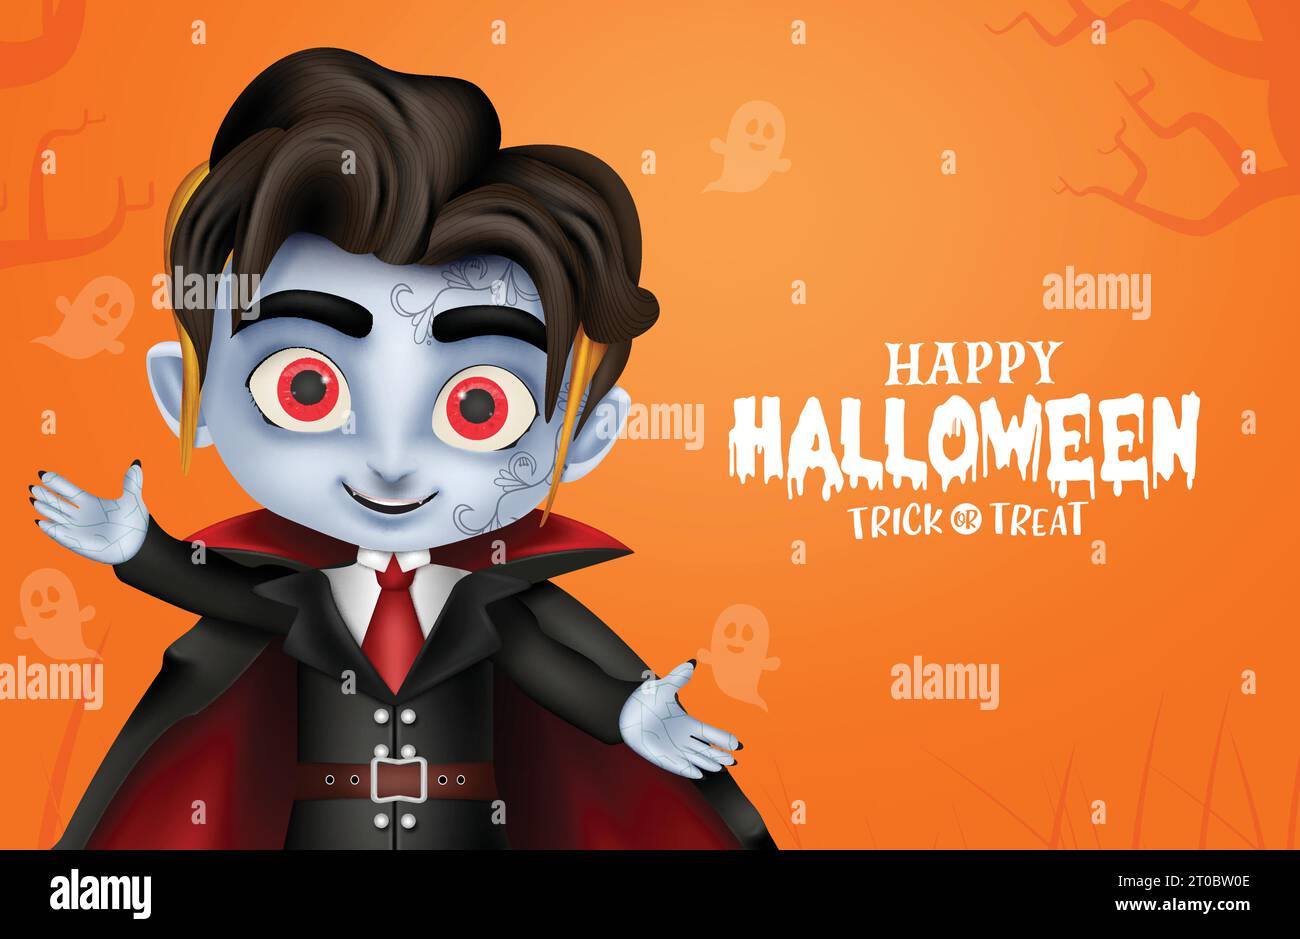 Halloween vampire character vector design. Happy halloween greeting text with friendly cute costume boy vampire zombie character for trick or treat Stock Vector